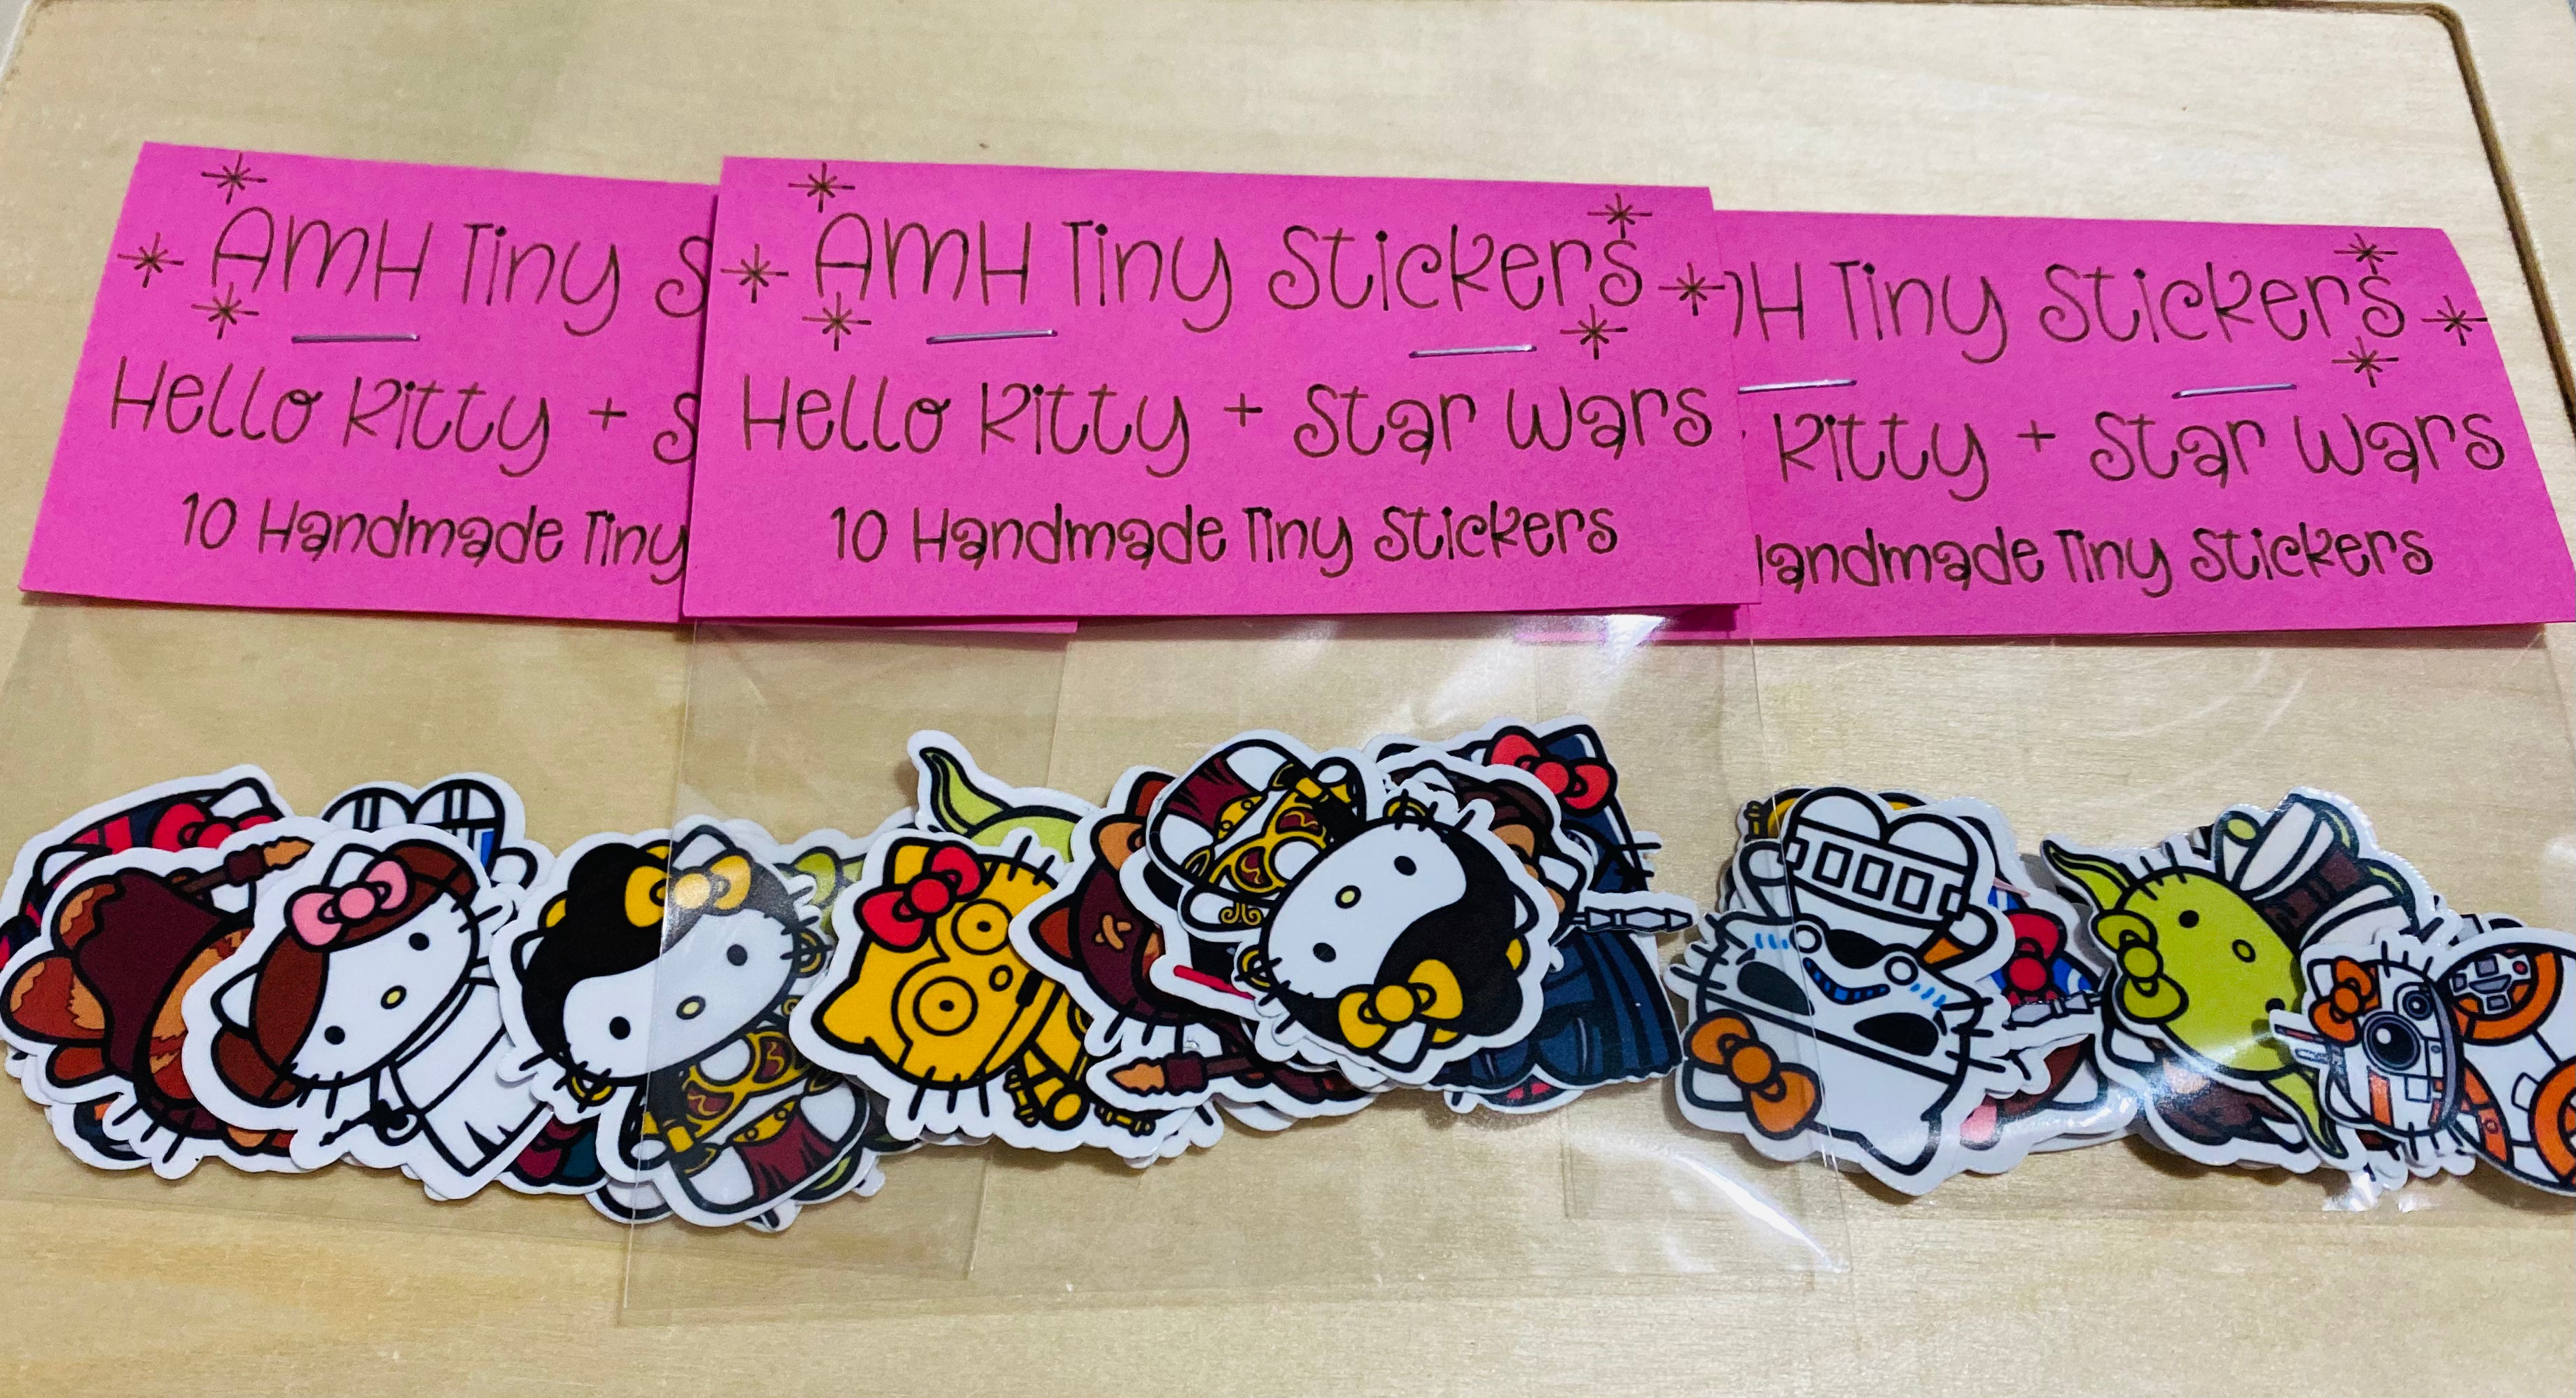 500 TINY stickers for $50!